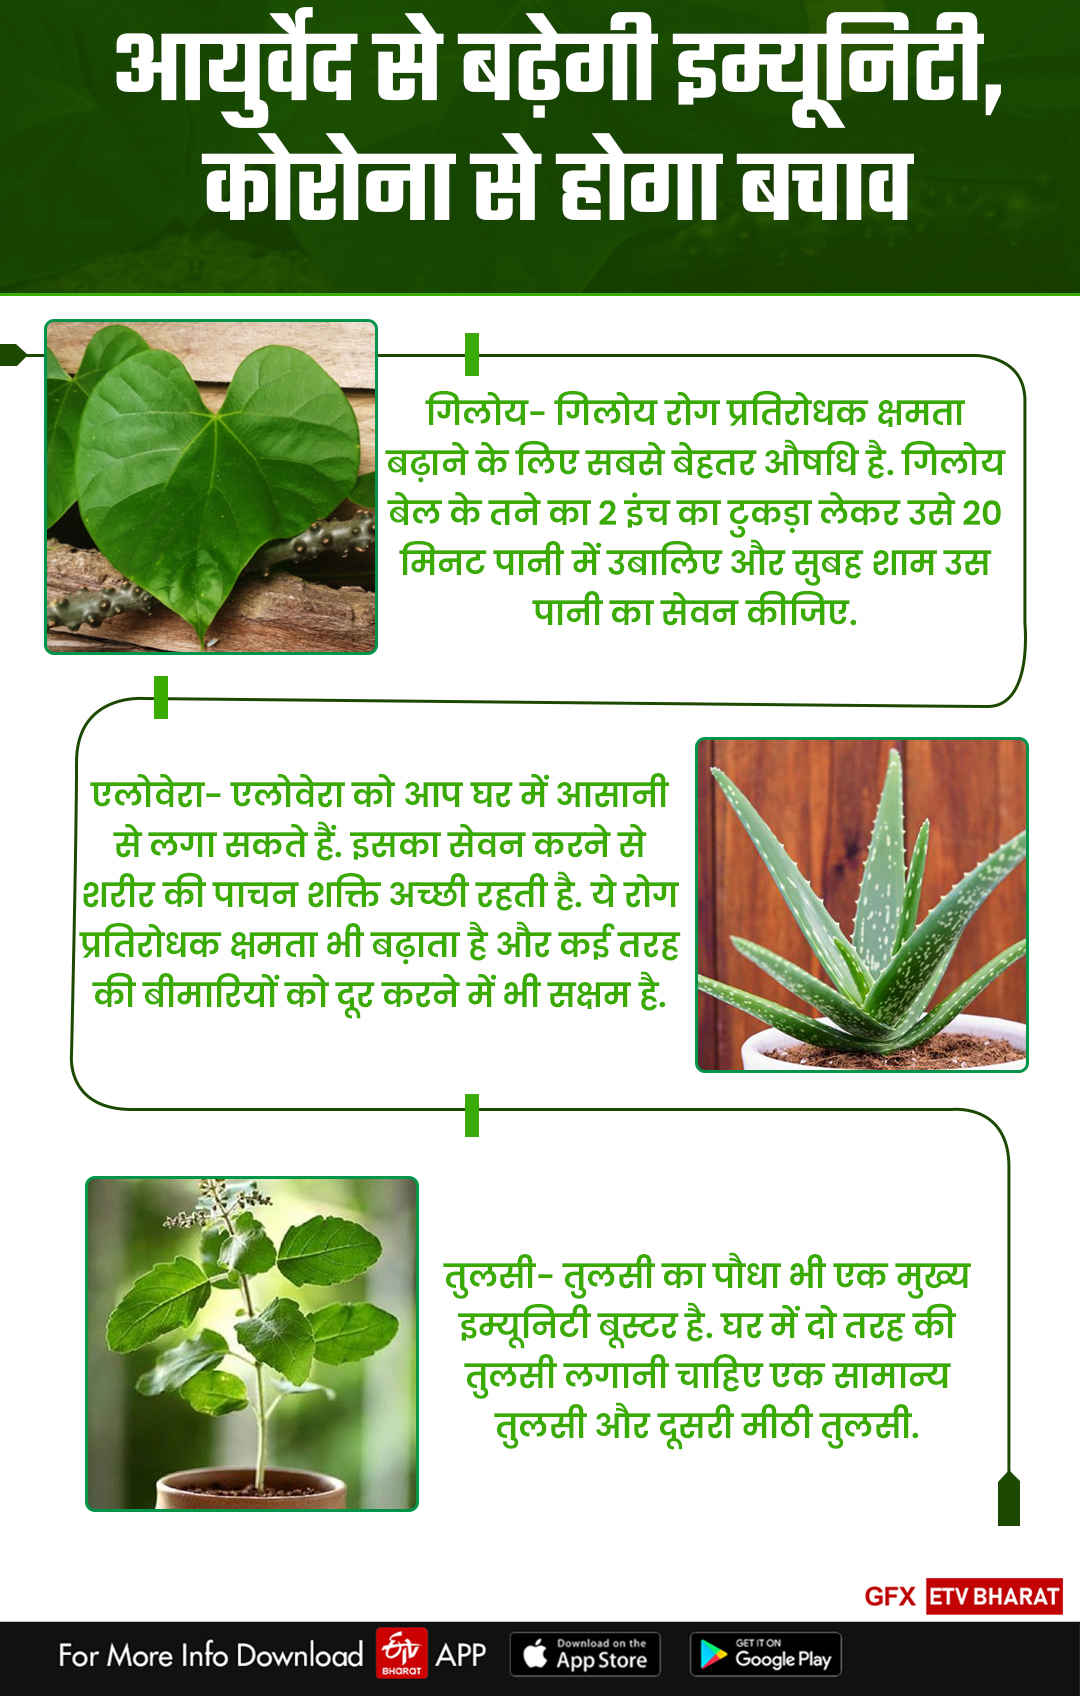 five plants which will boost immunity and help to prevent coronavirus